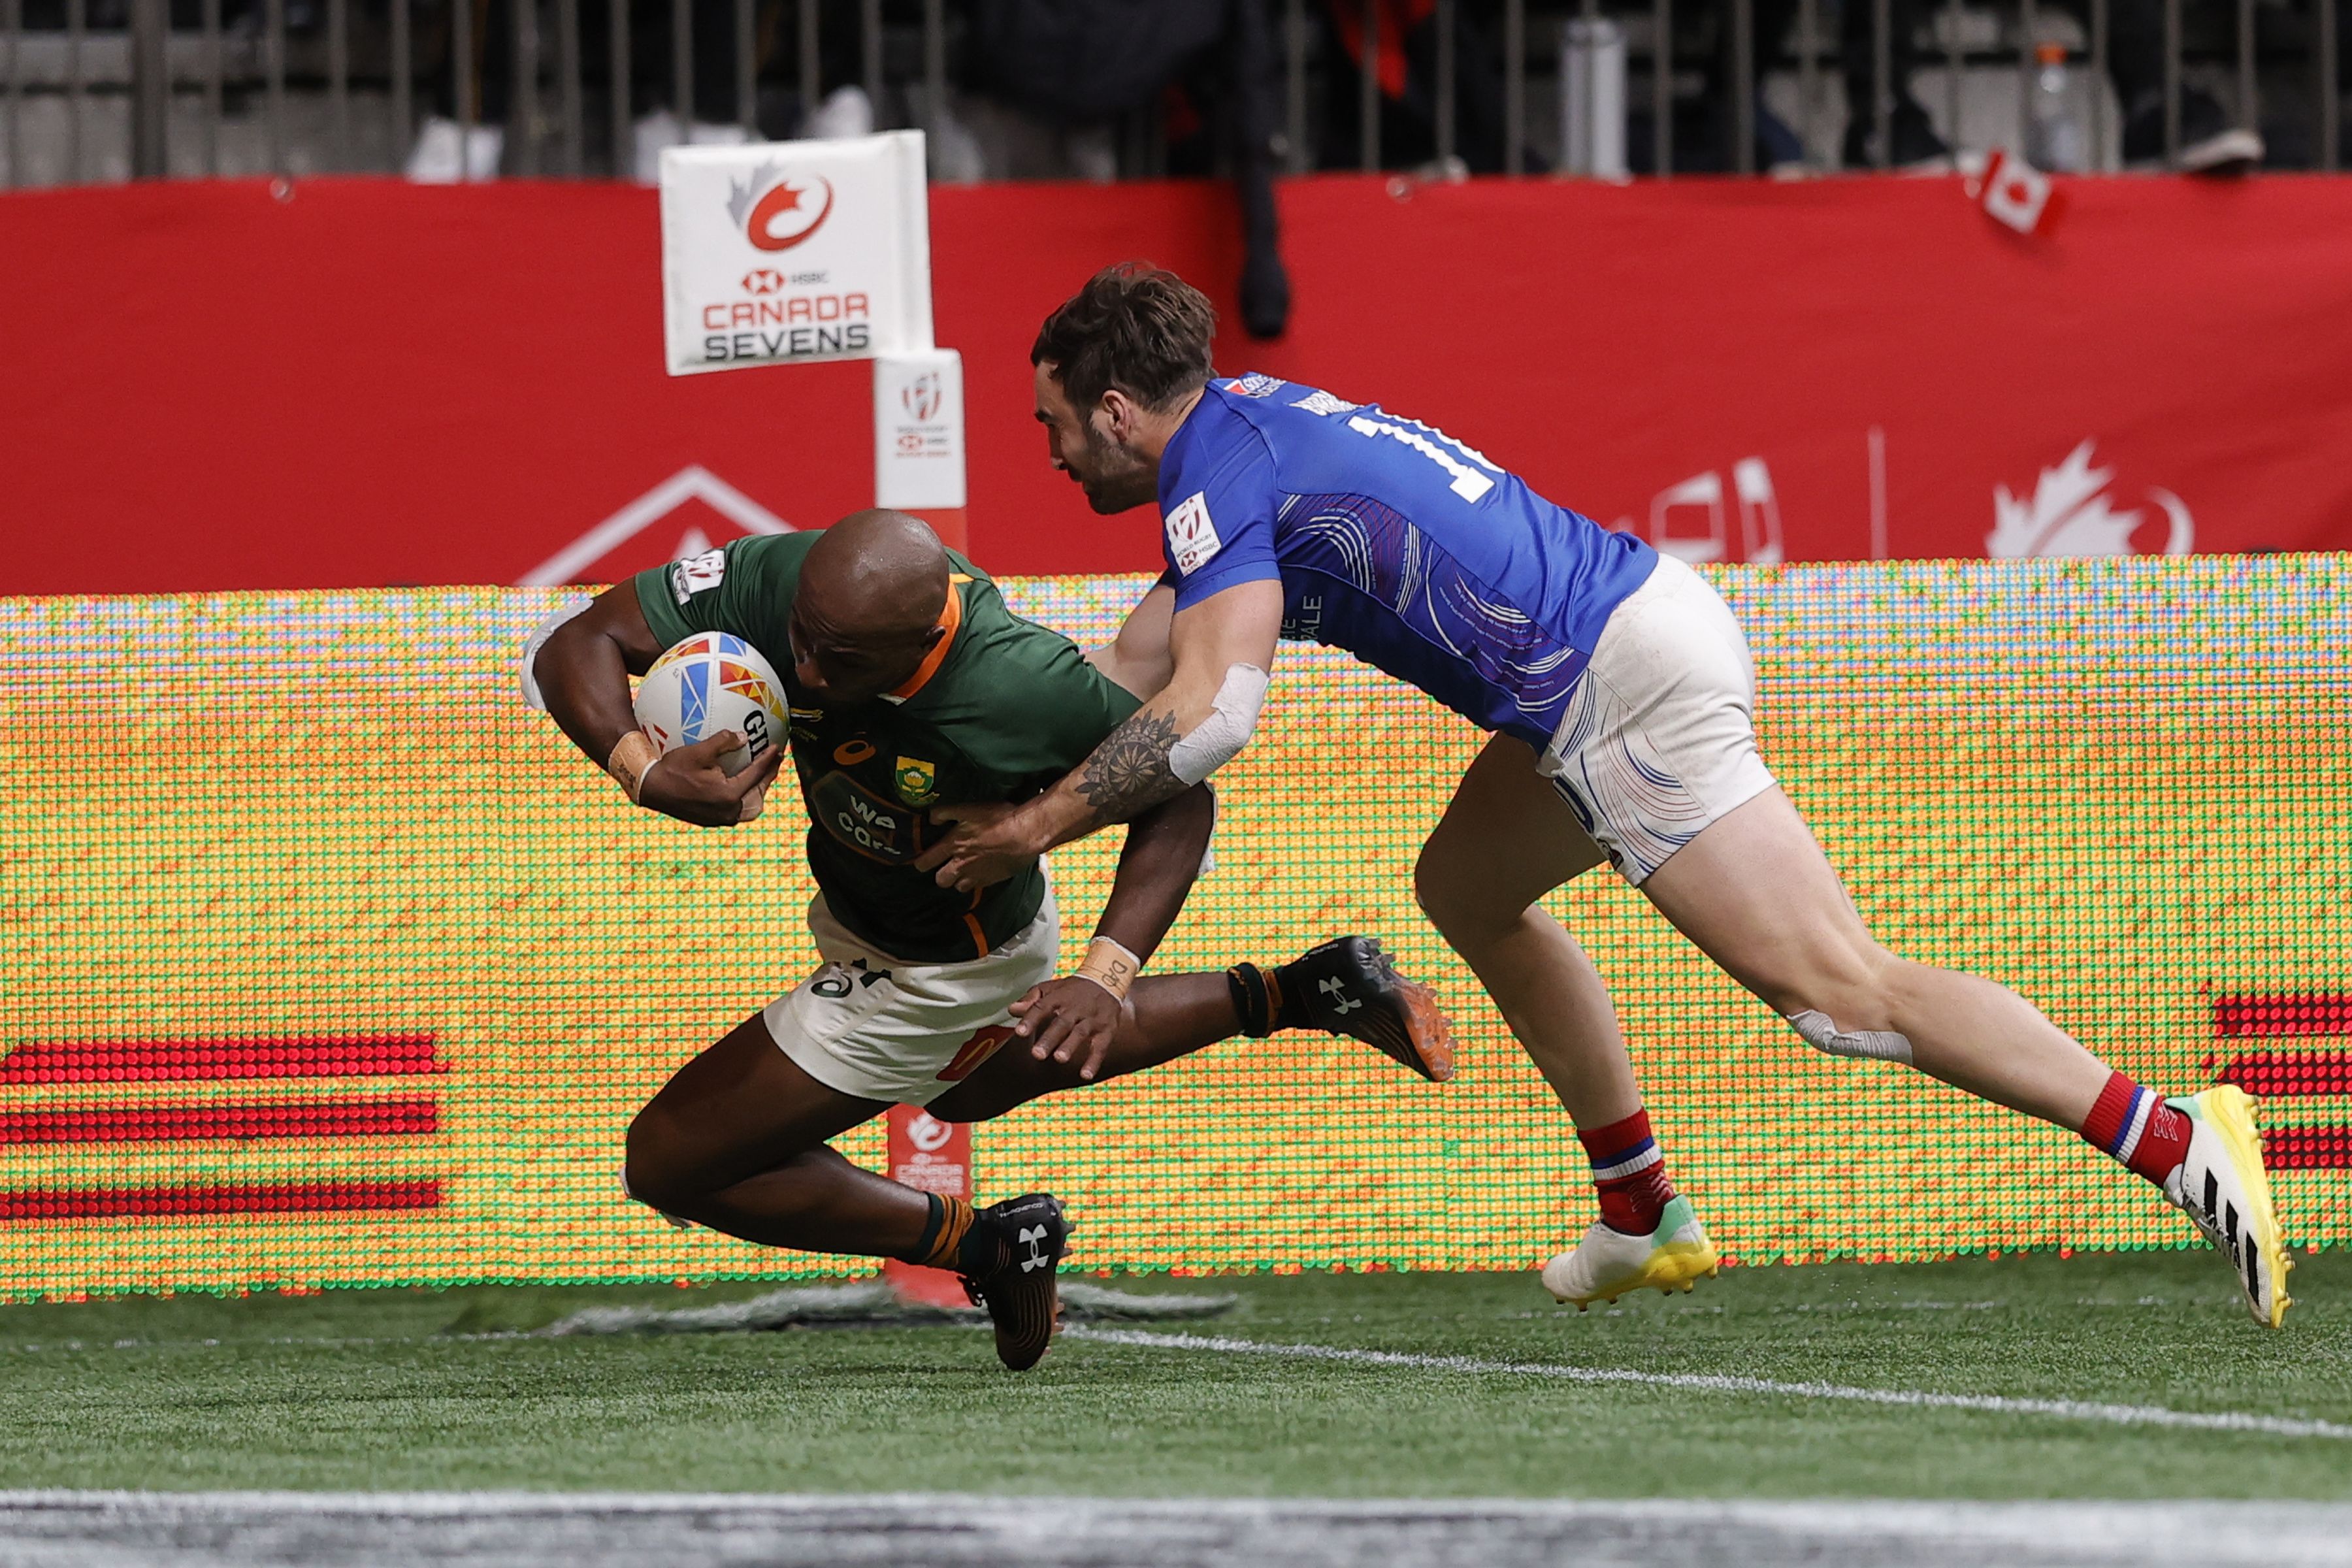 France 7s vs South Africa 7s Prediction, Betting Tips & Odds │12 MAY, 2023